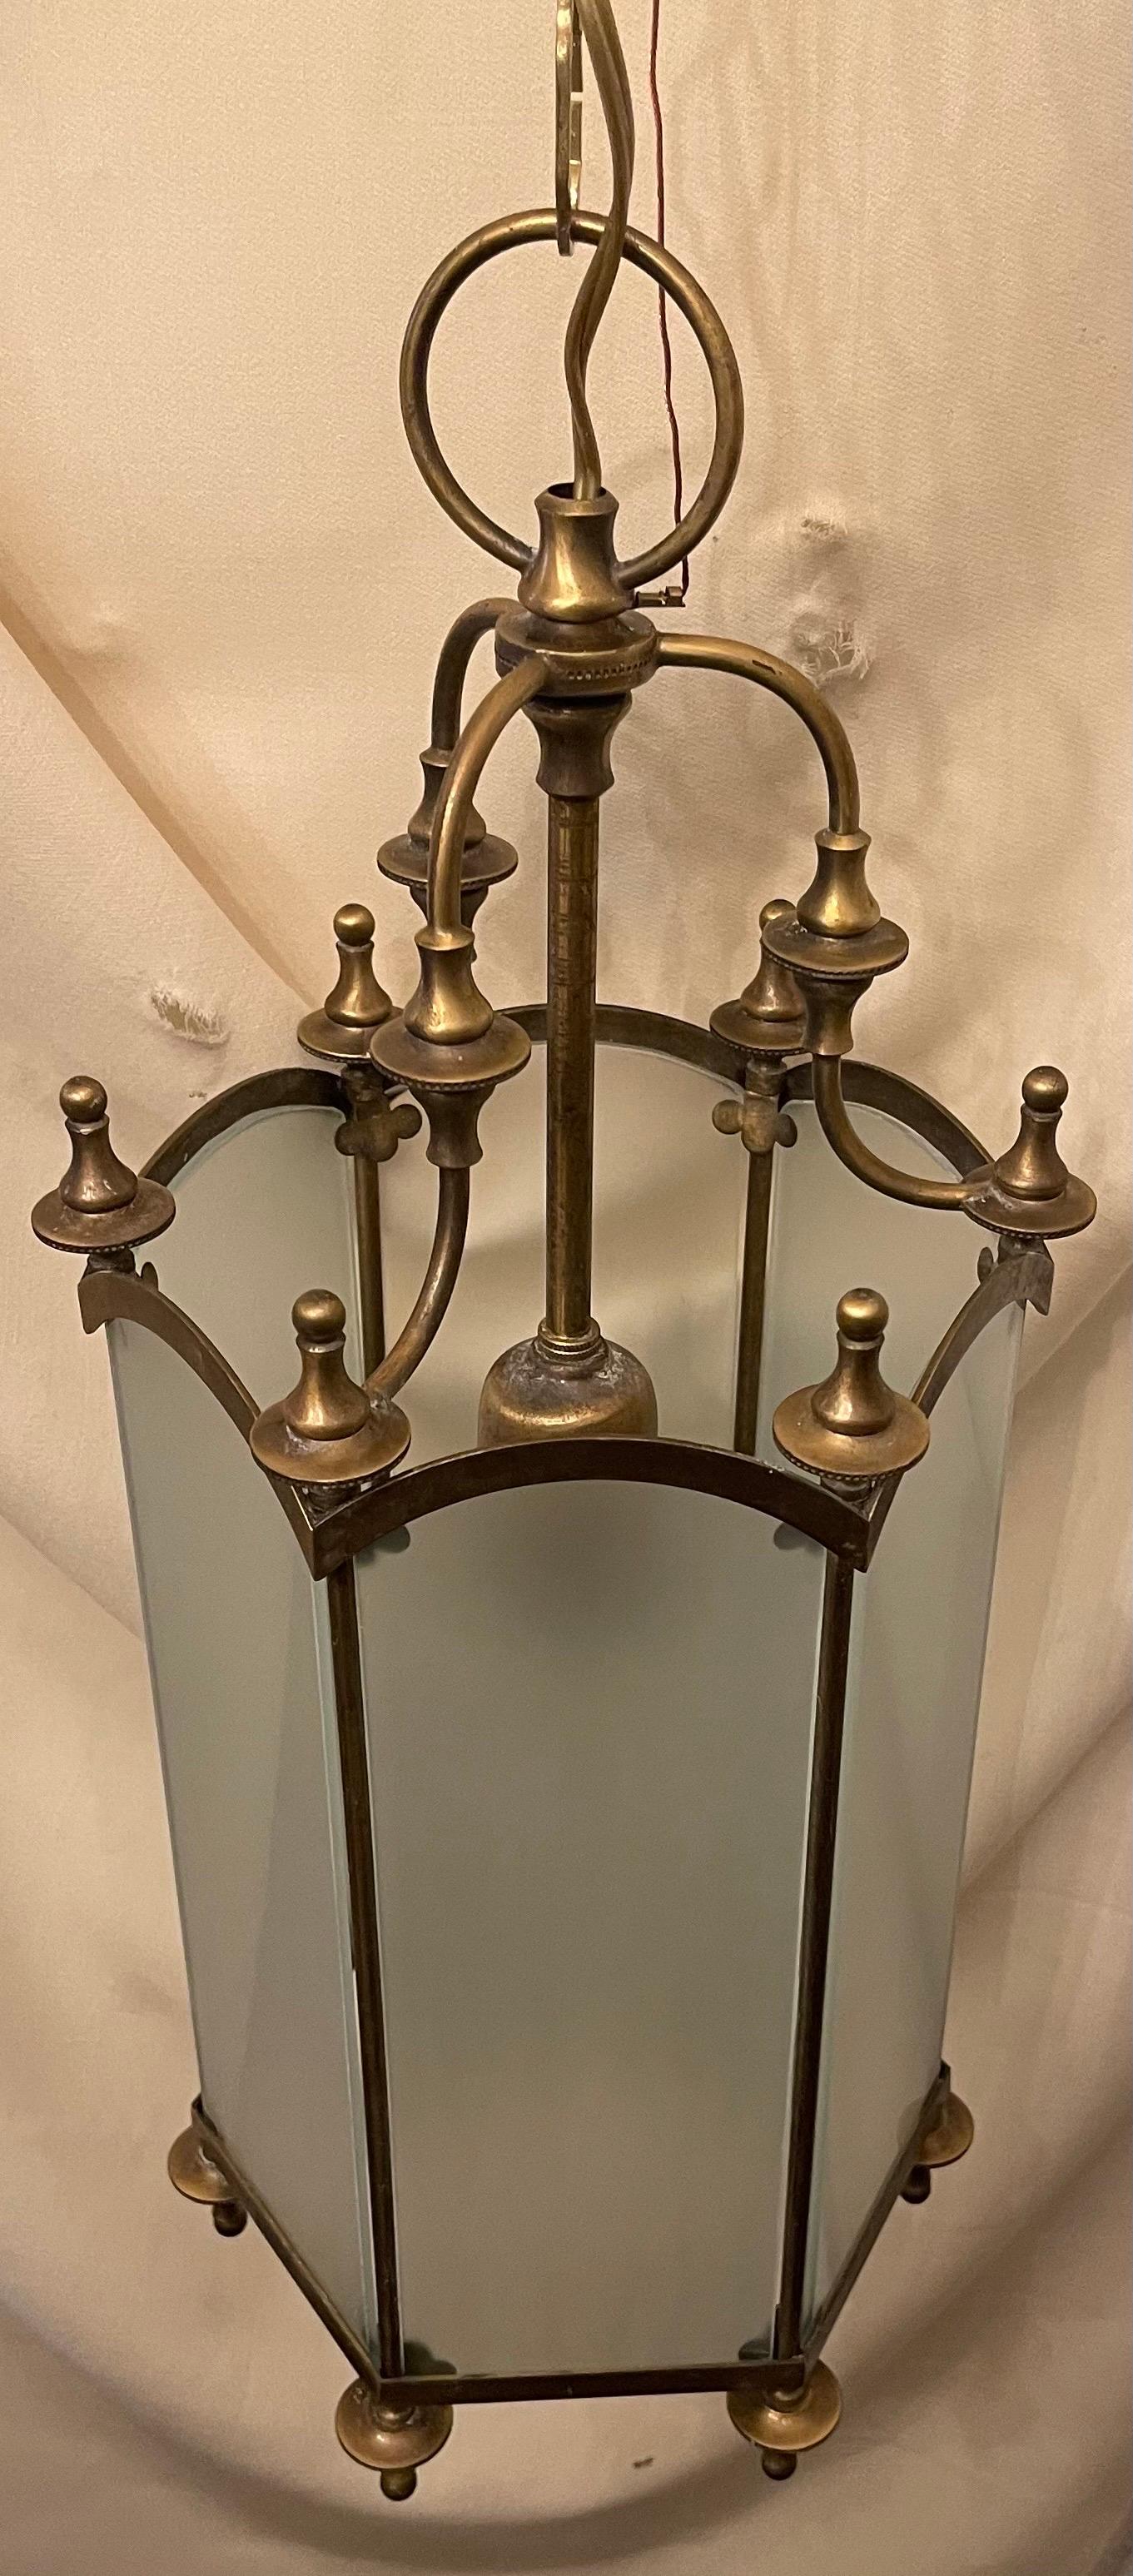 A wonderful regency style bronze / brass with frosted glass panel hexagon shaped lantern fixture finished with finials.